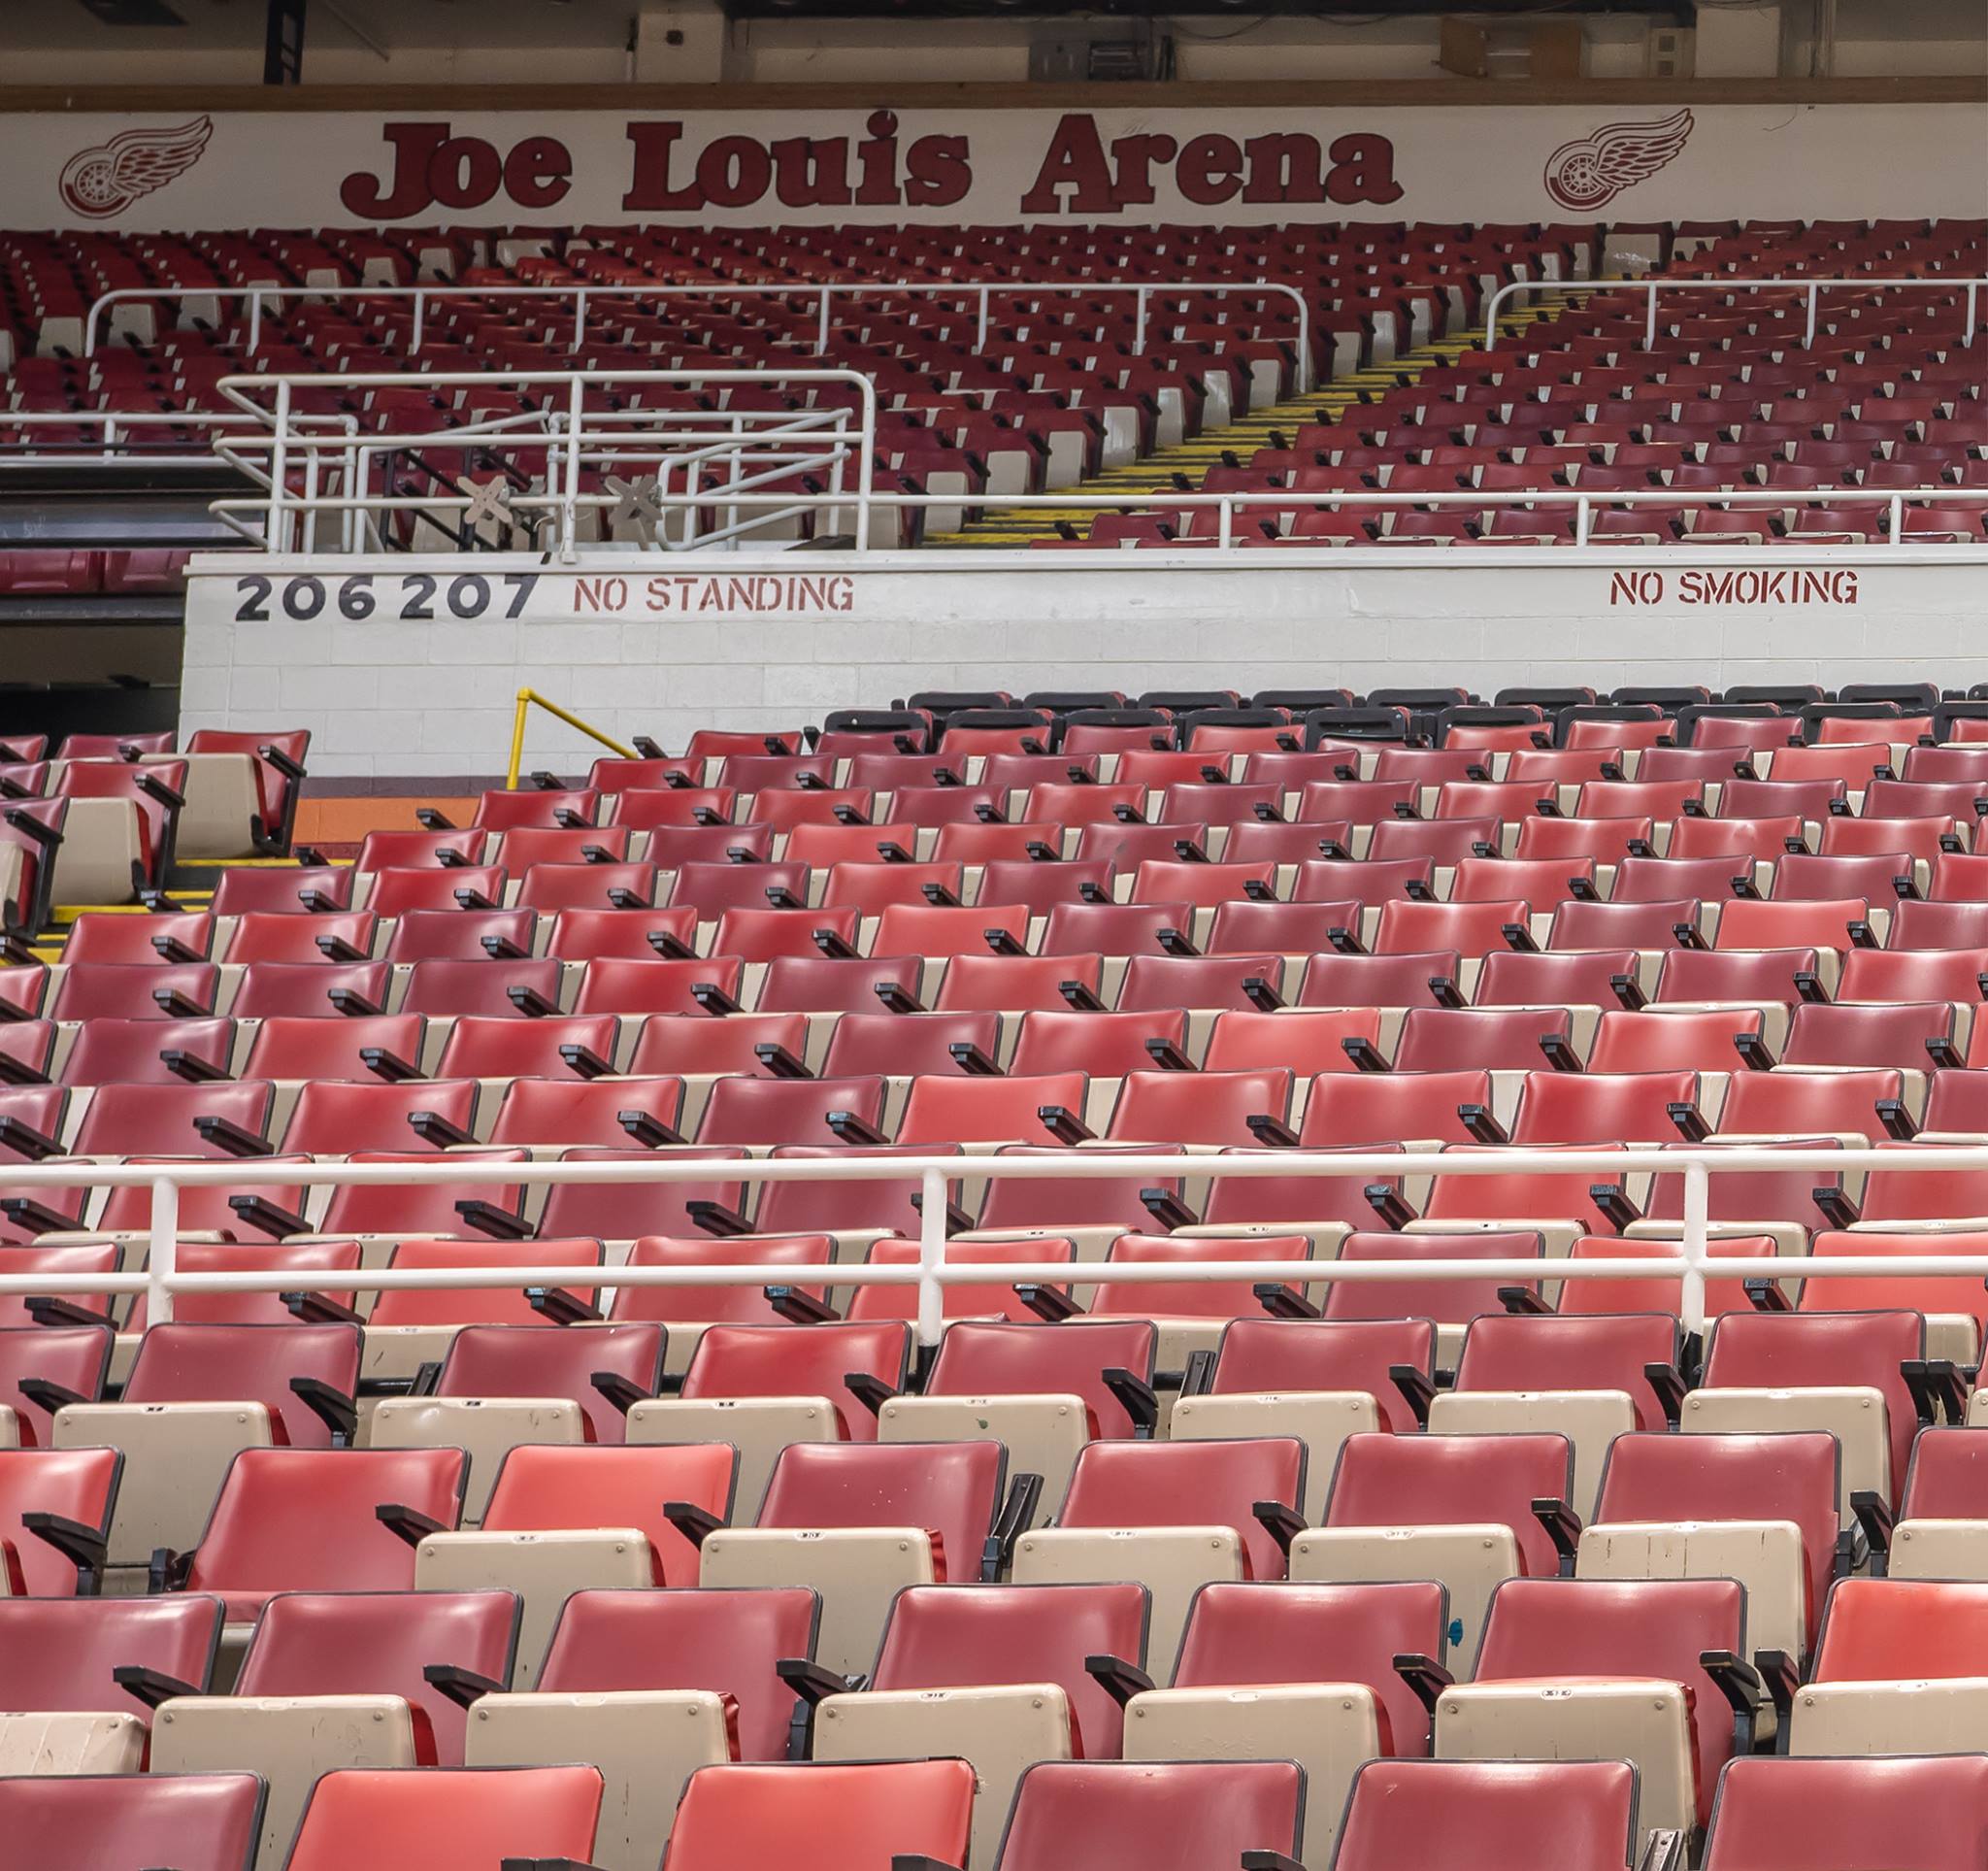 You Can Now Own a Seat From Joe Louis Arena For Only $50